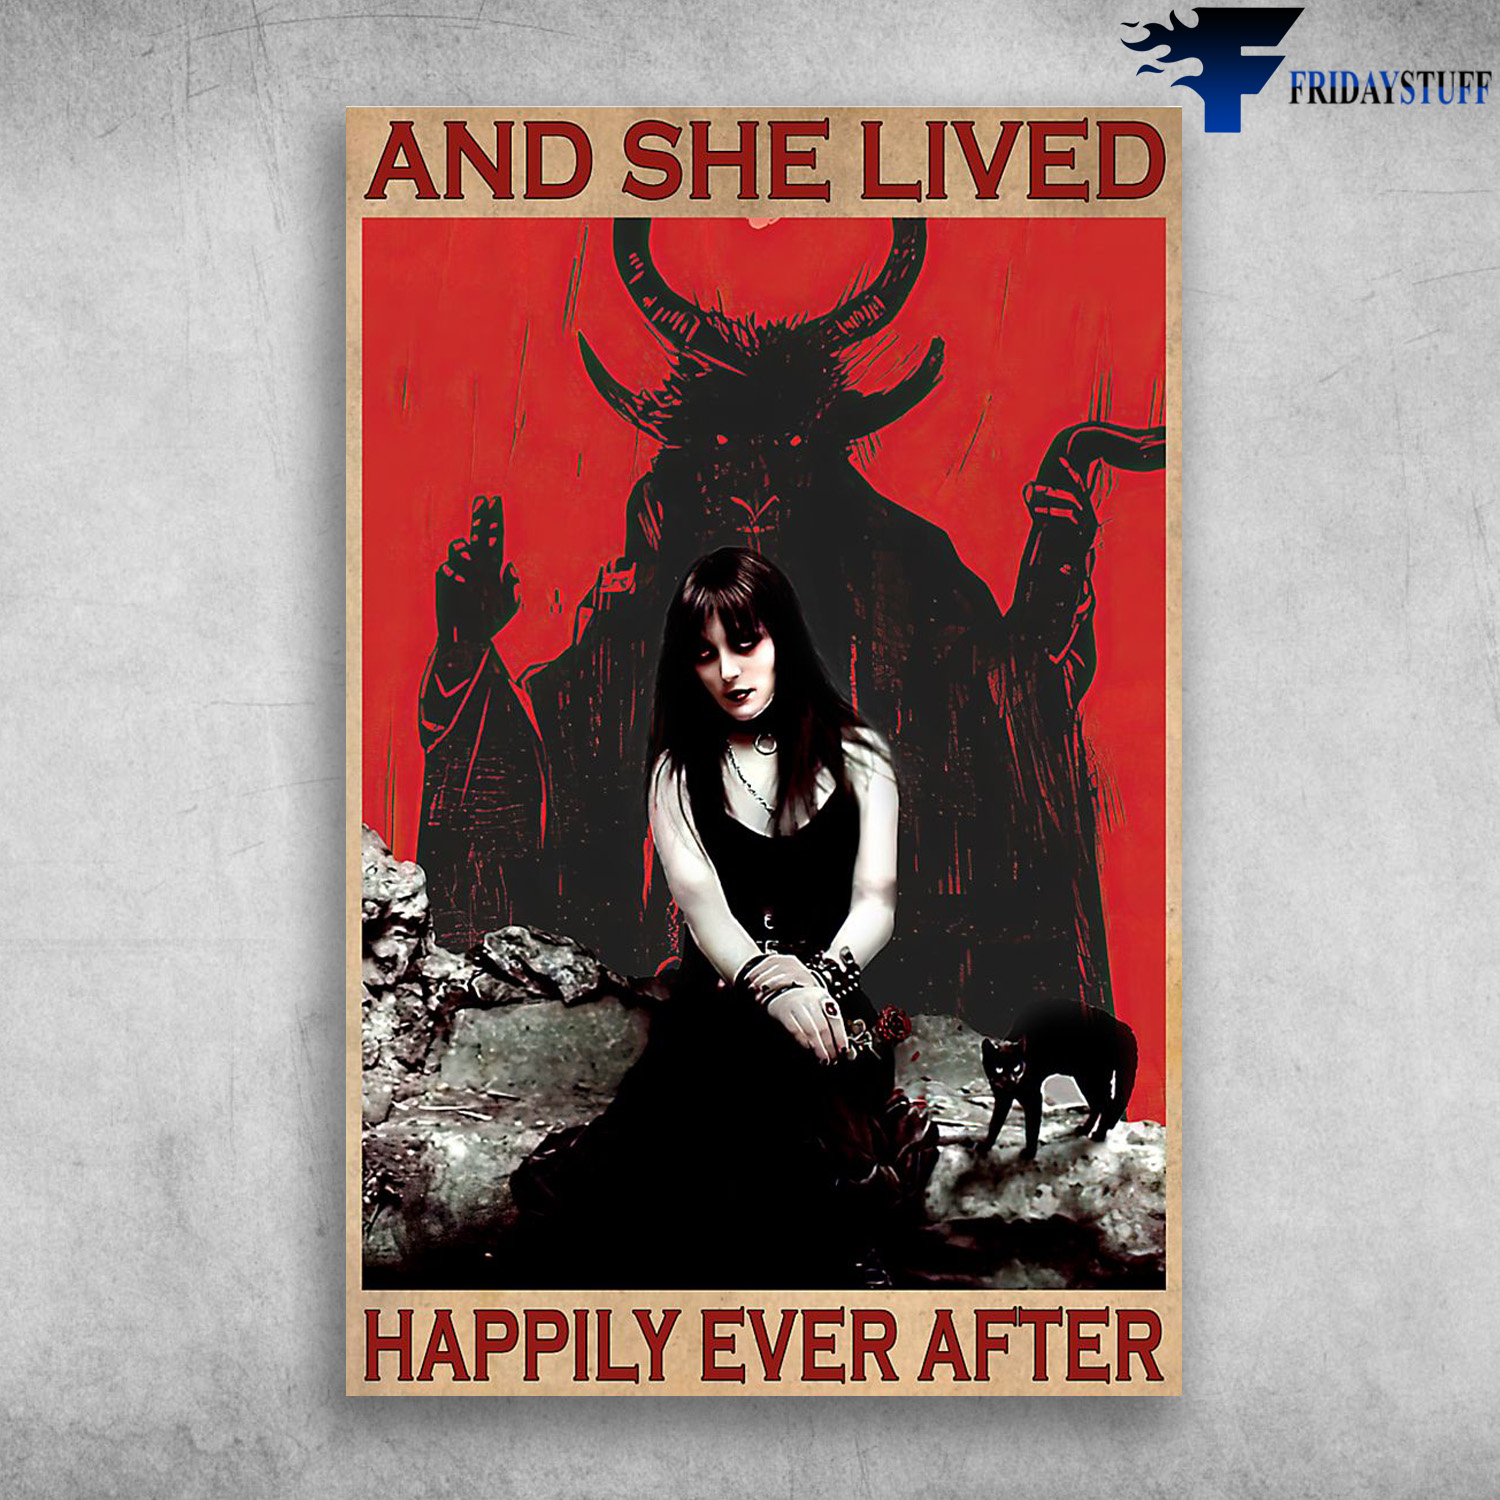 The Girl With Black Cat And Demon - And She Lived, Happily Ever After